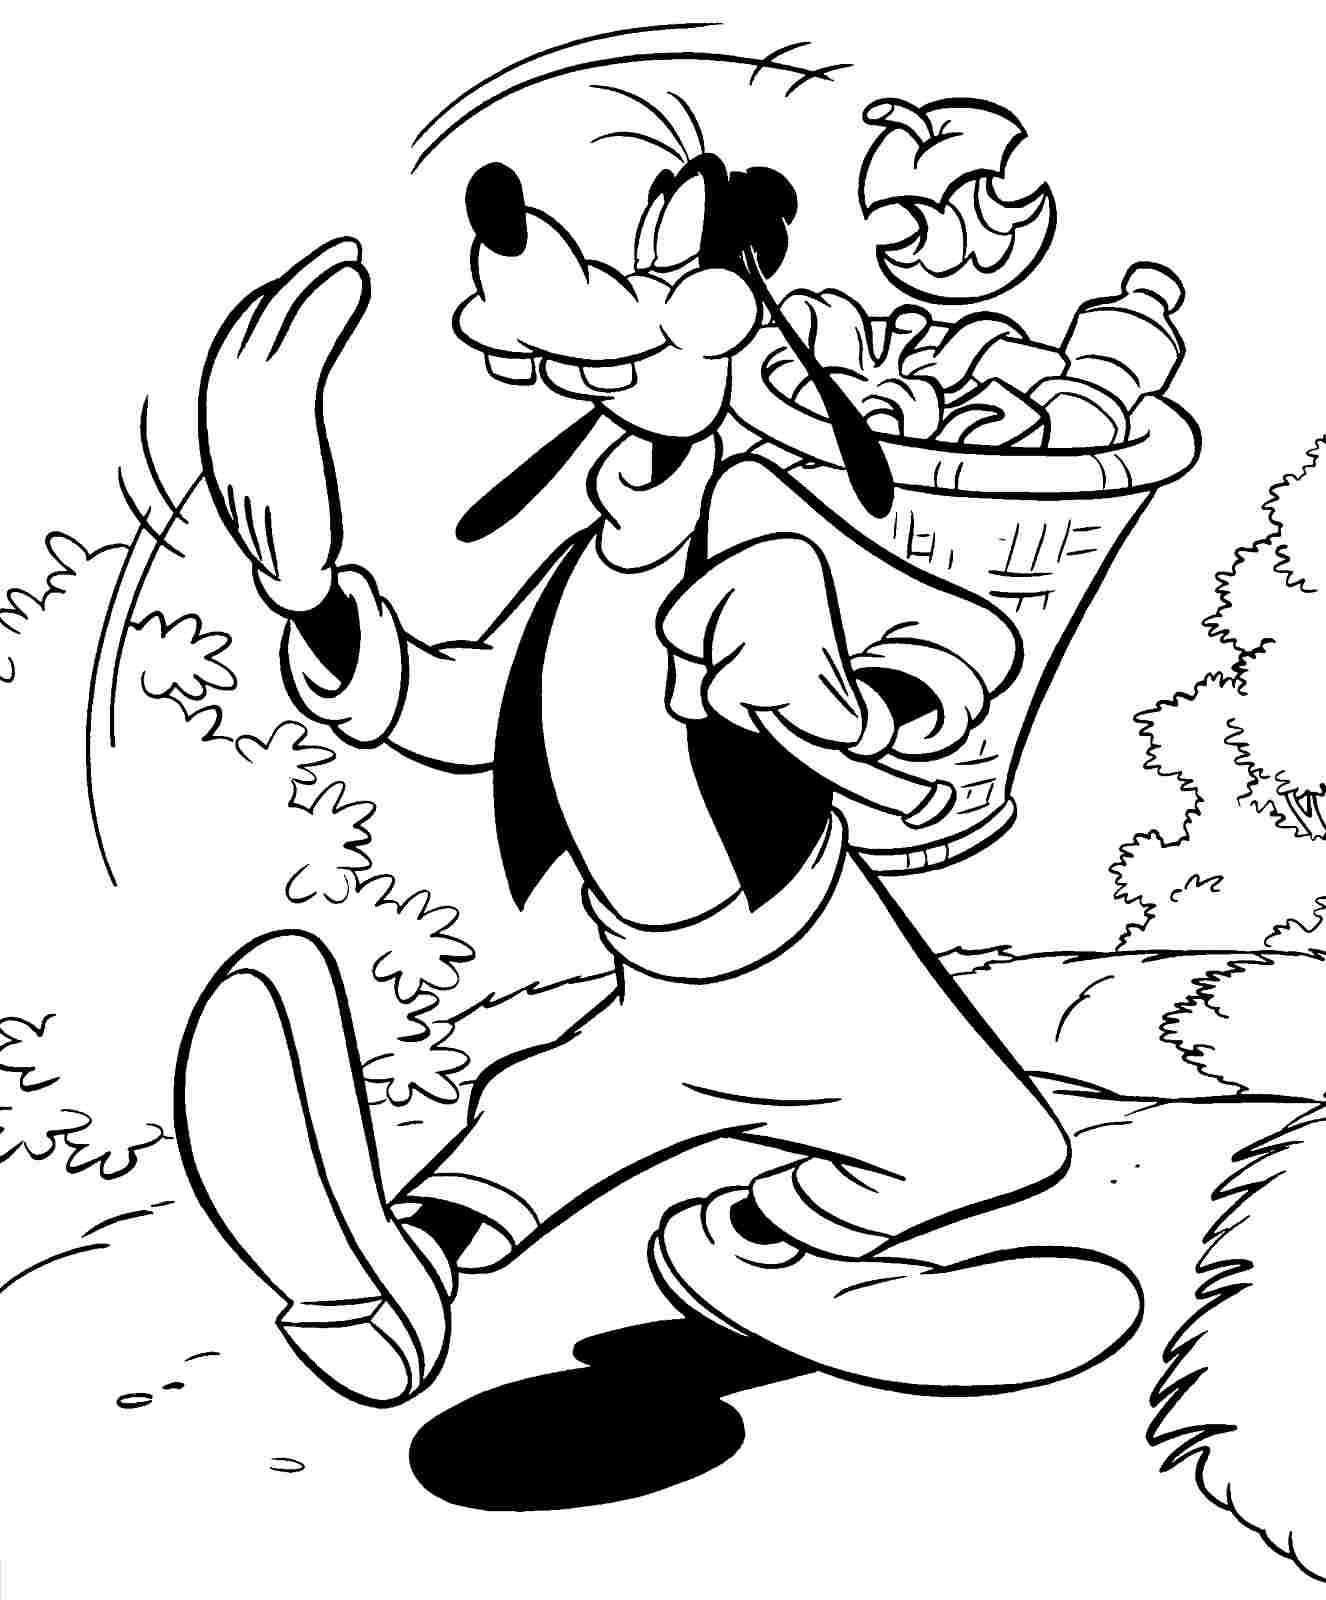 Goofy In The Street Coloring Page